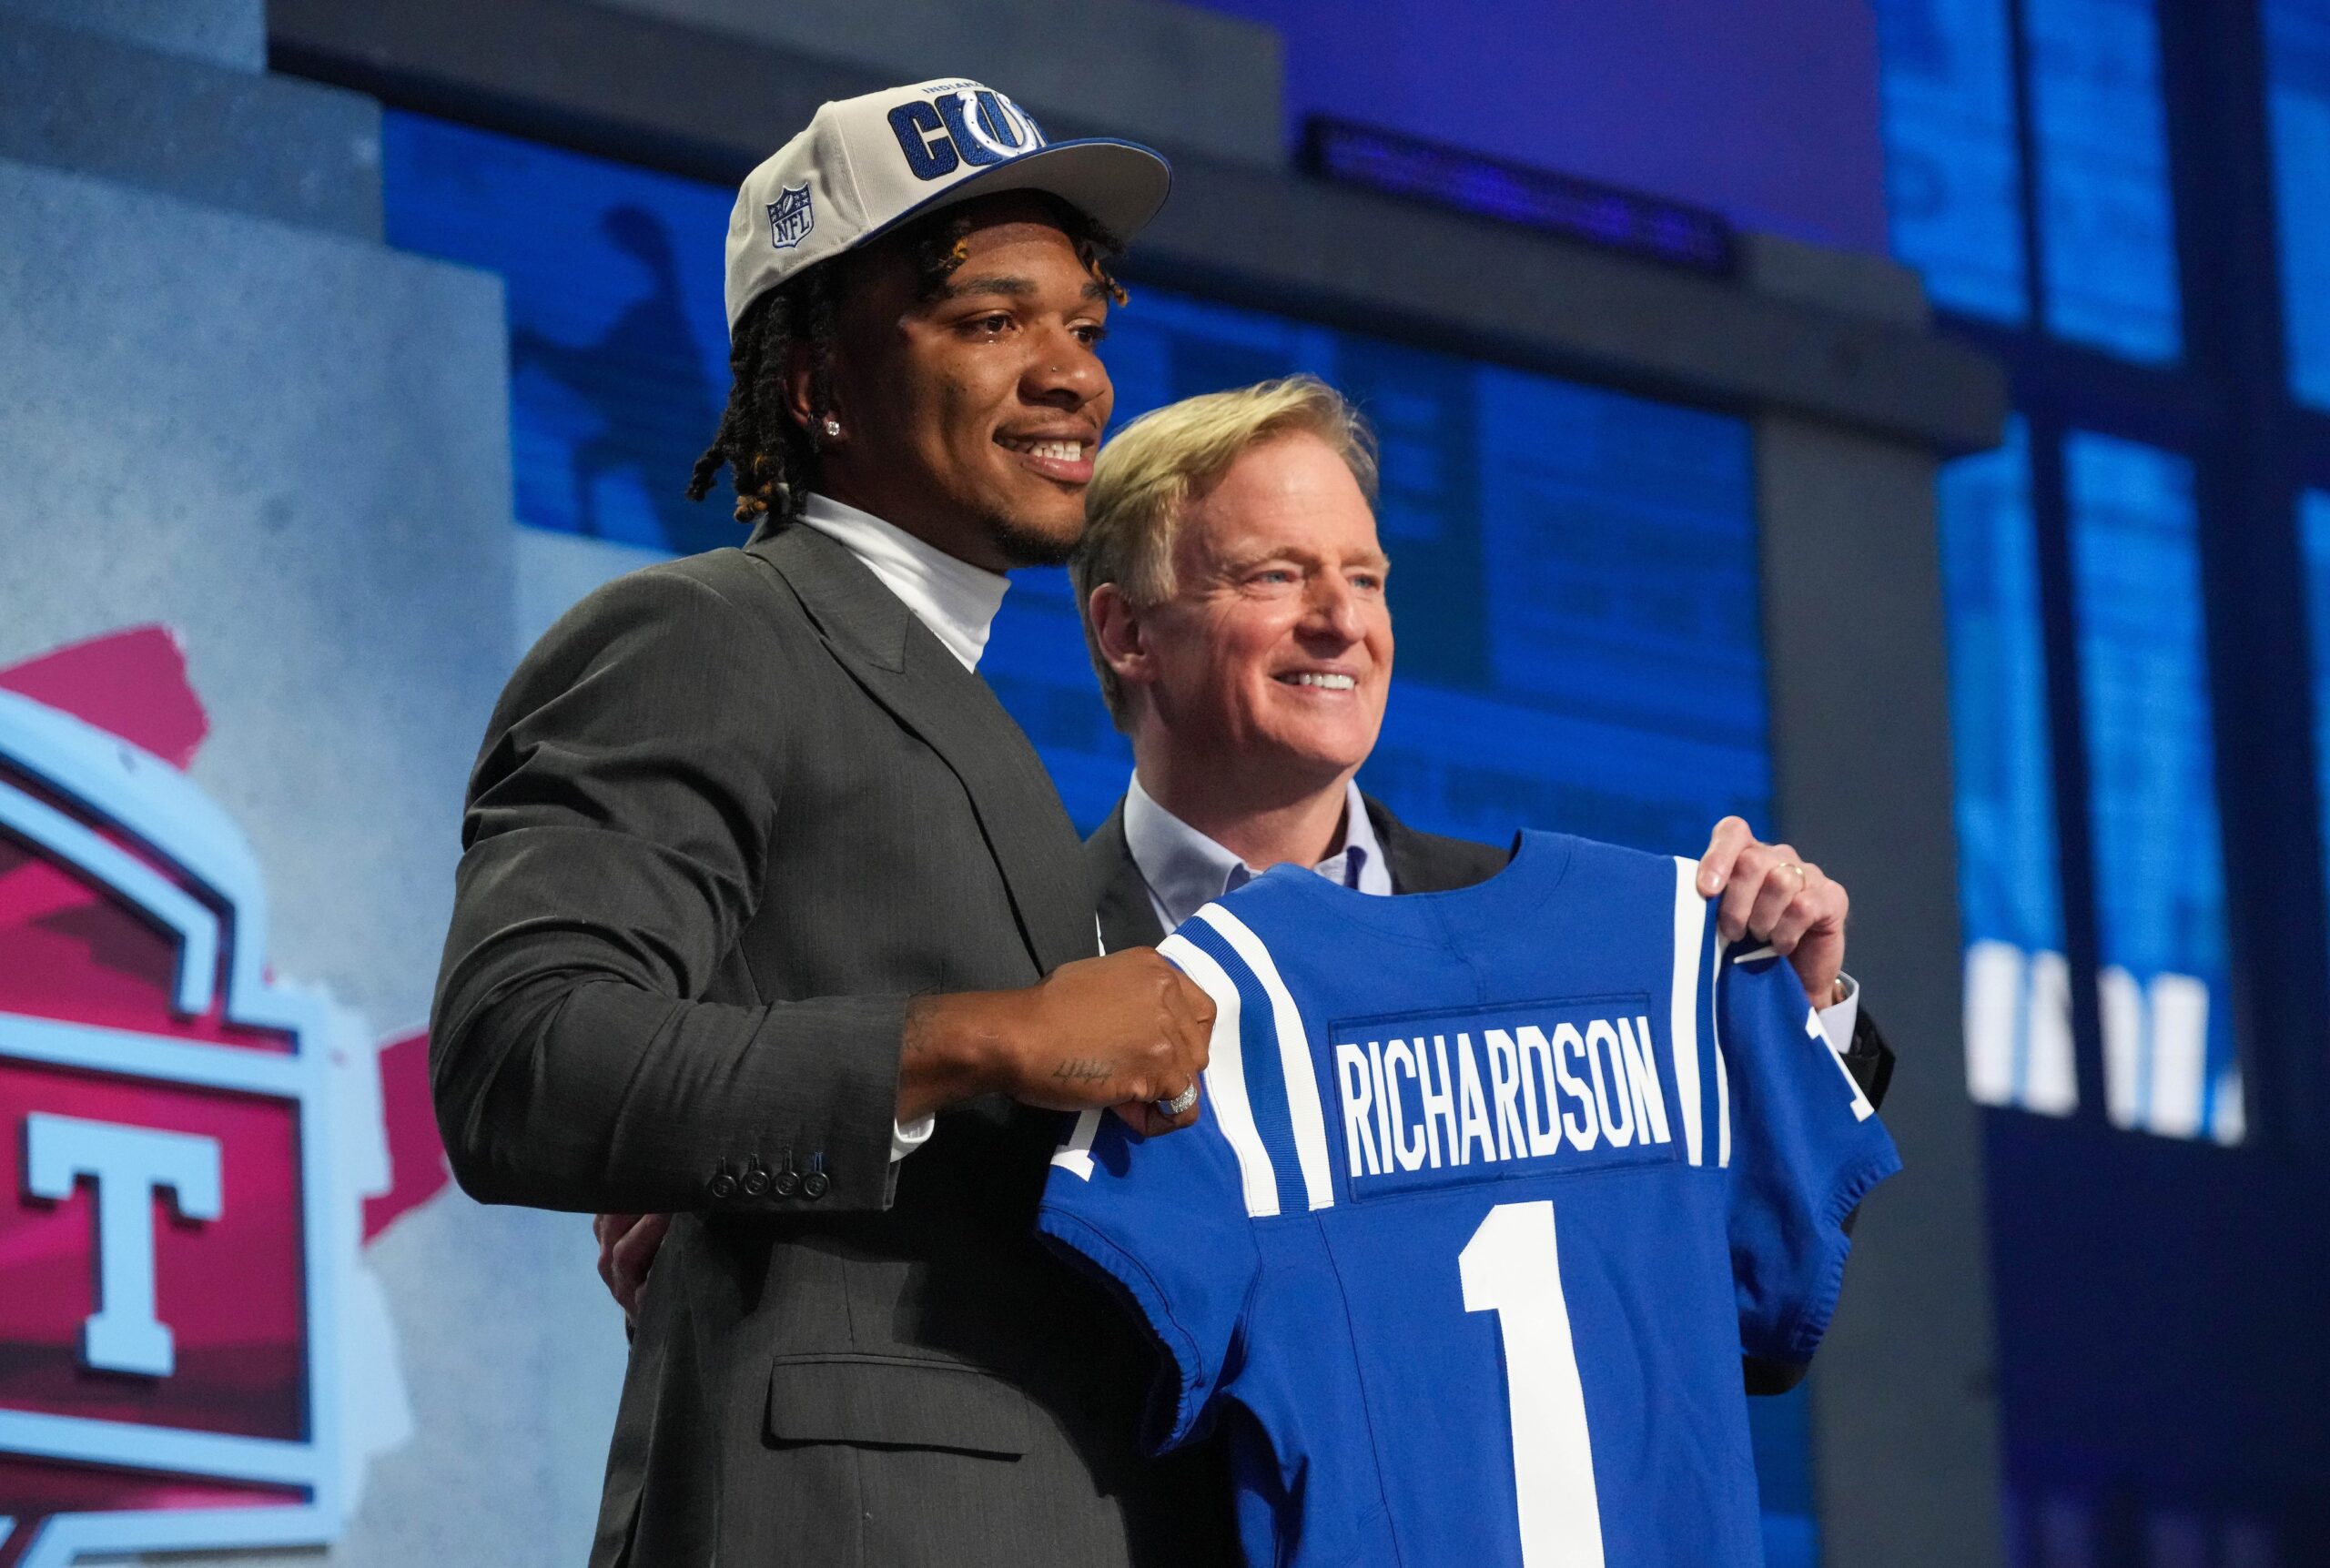 Quarterback Anthony Richardson poses with NFL Commissioner Roger Goodell after being selected by the Indianapolis Colts.